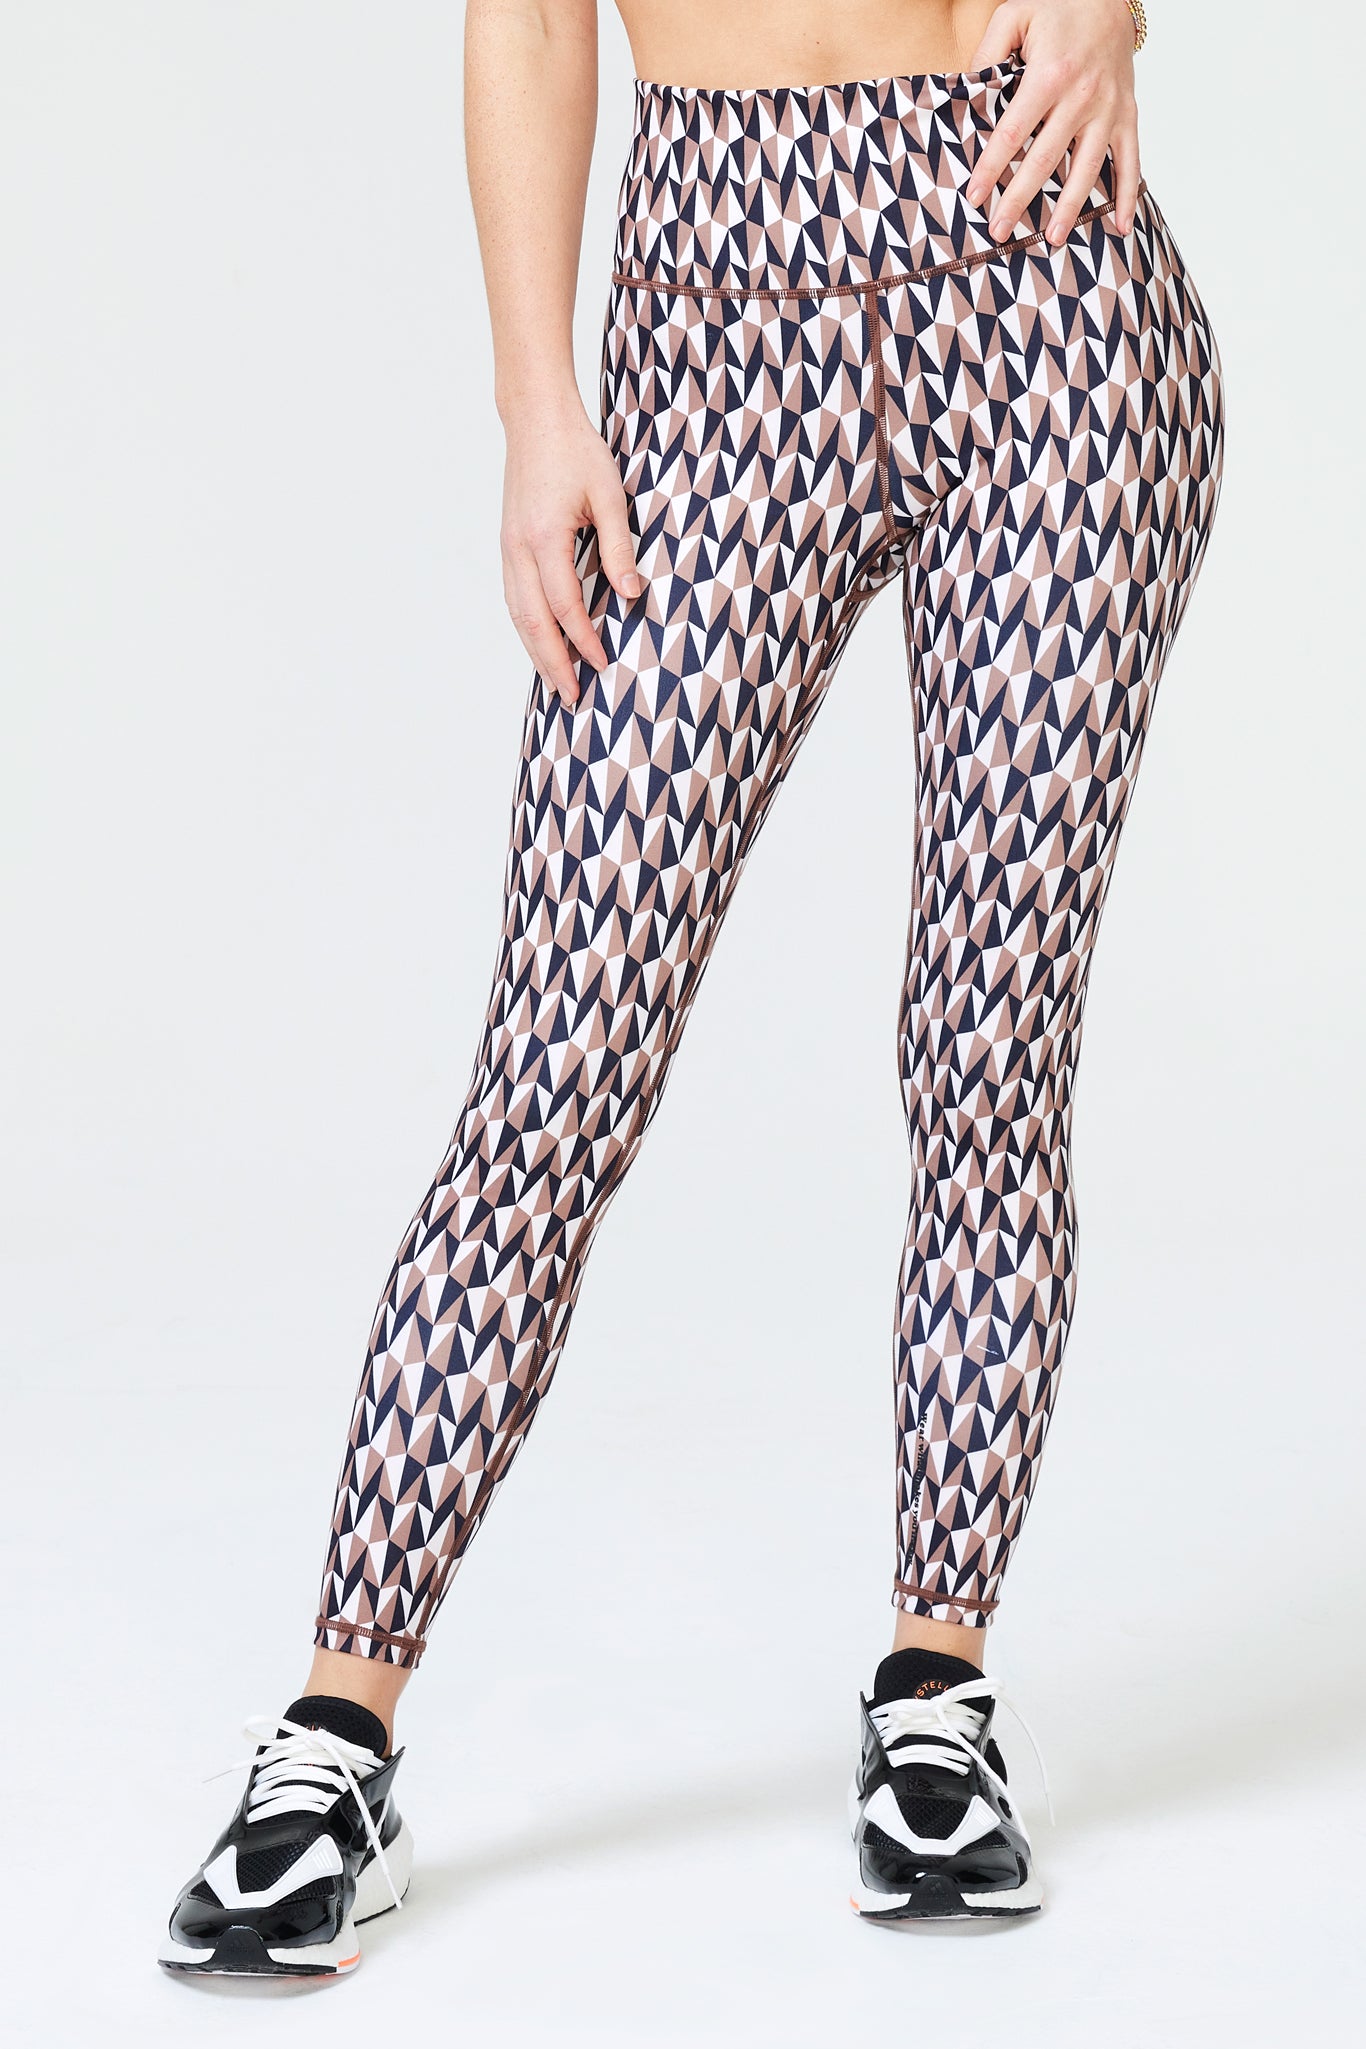 The Alo Leggings Everyone Purchased This Year